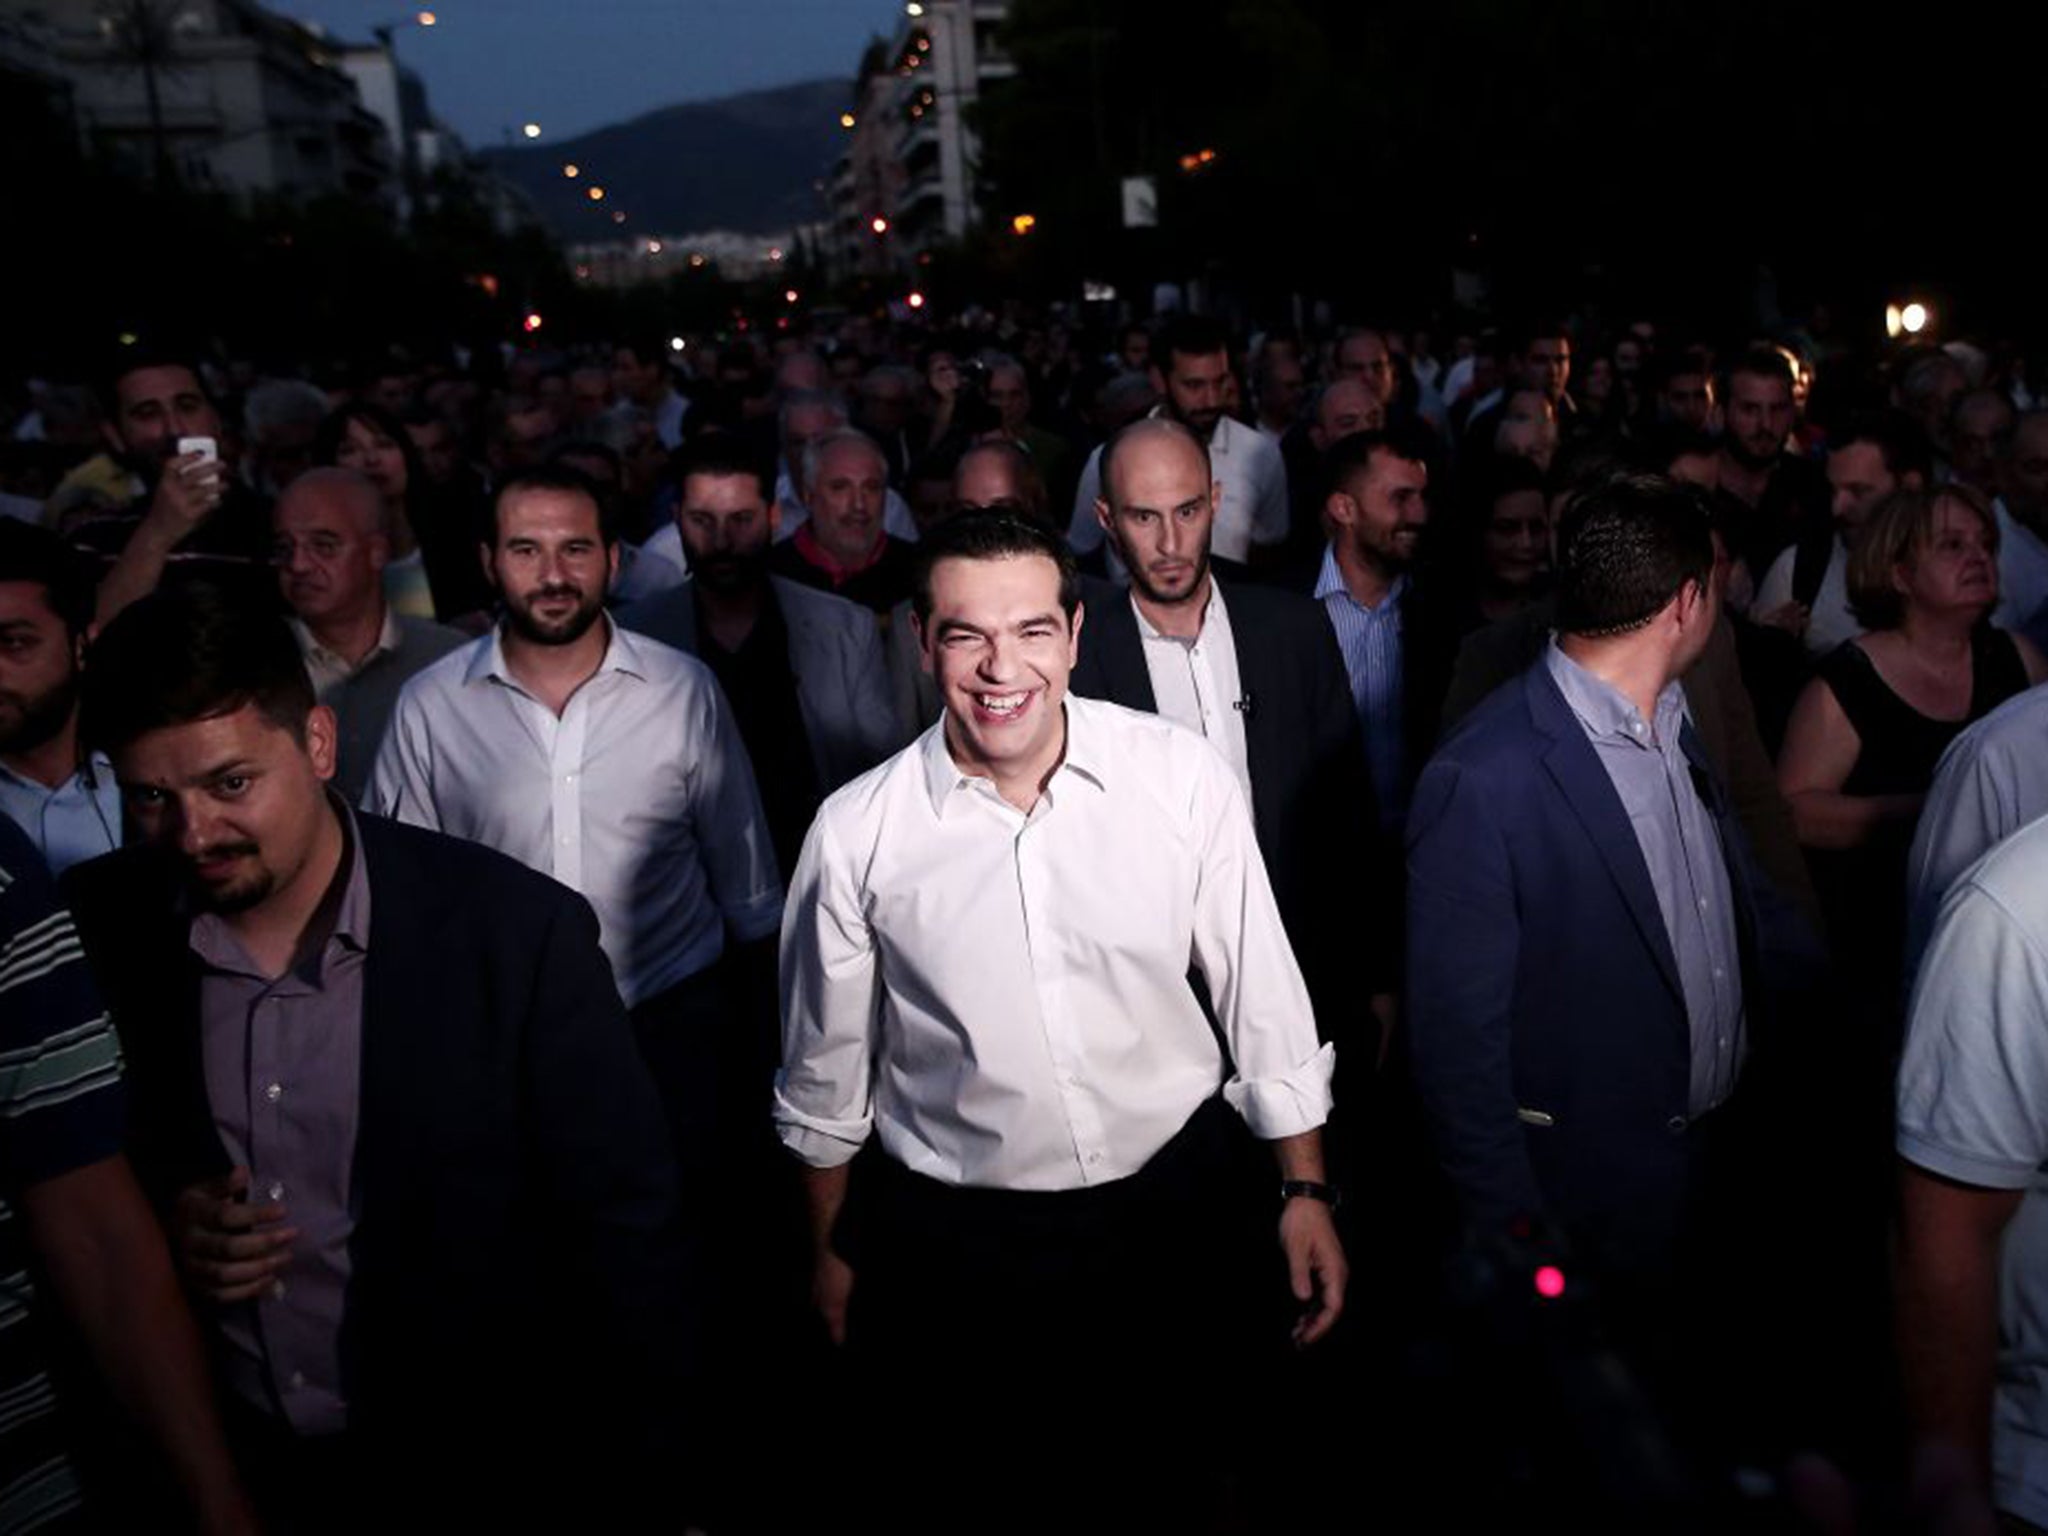 Twitter was awash with rumours of mutiny among politicians in the Syriza party and Tsipras's government on Tuesday.